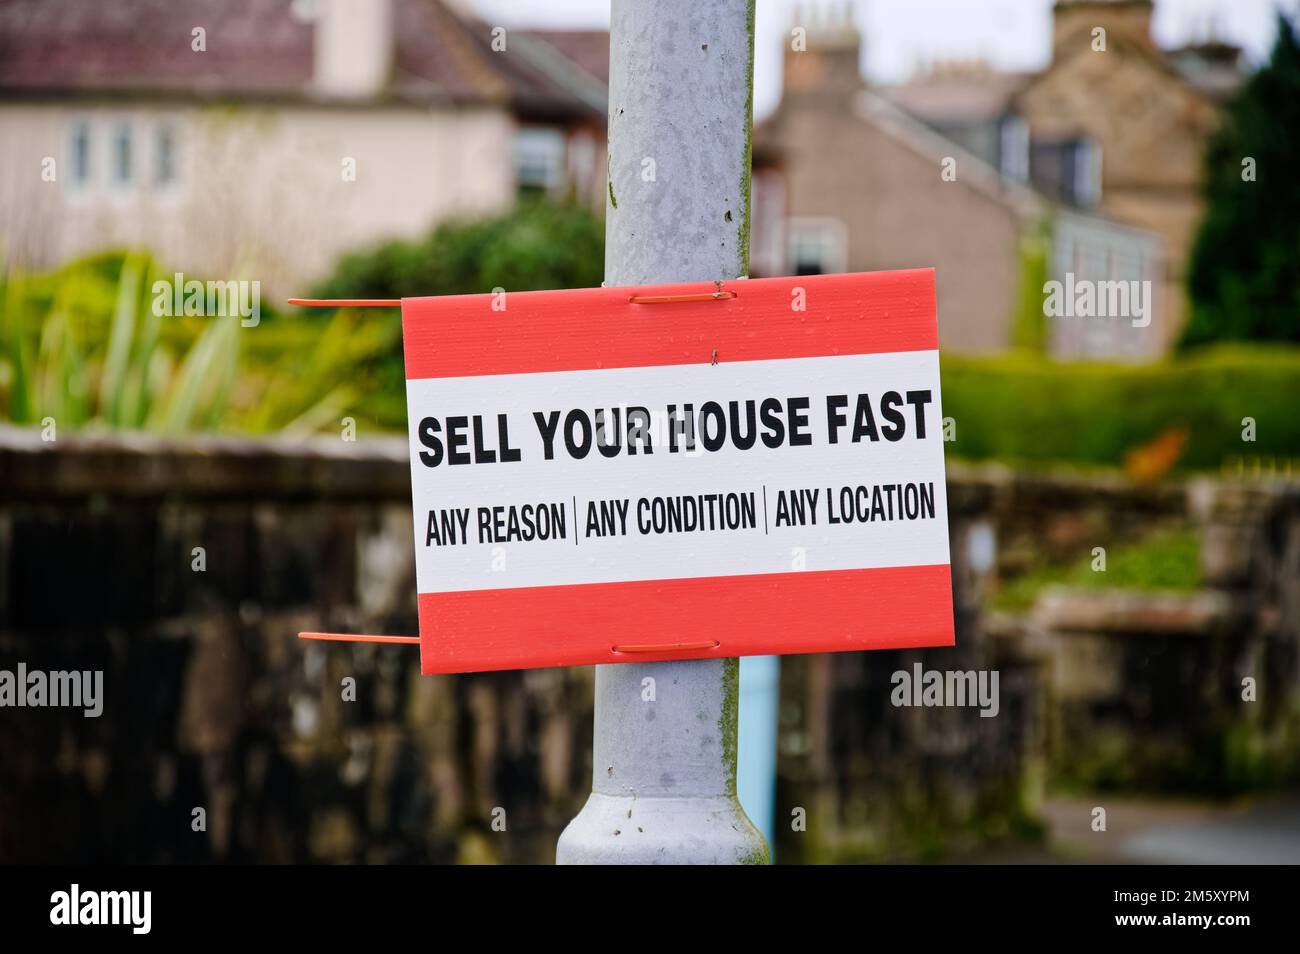 Sell your house fast sign outside residential area during property crisis Stock Photo